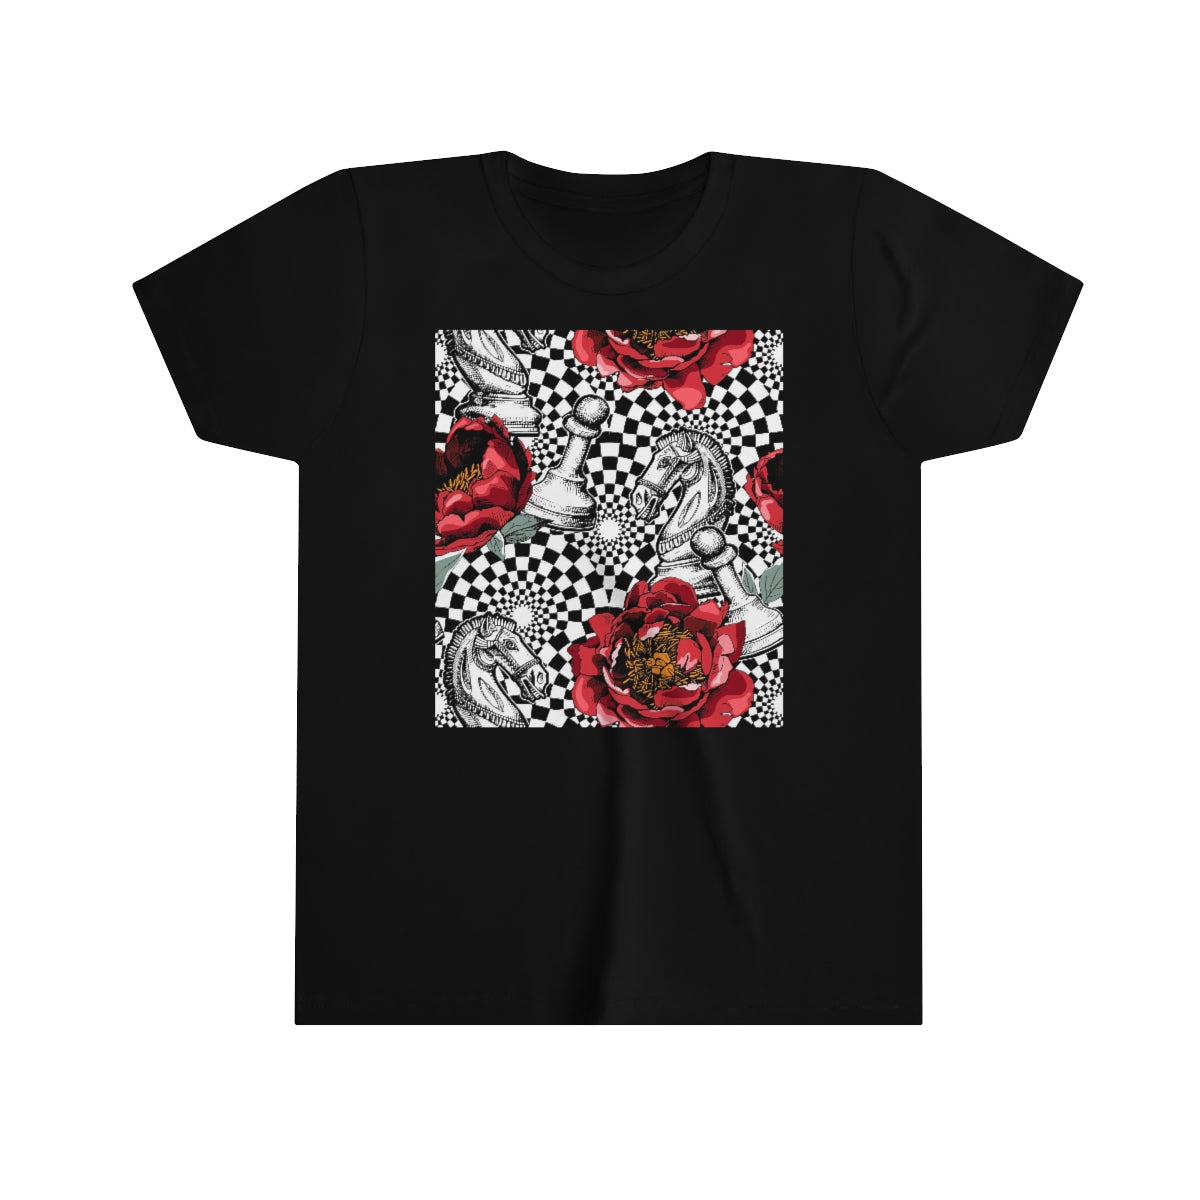 Youth Short Sleeve Tee "Optical illusion Chess & flowers"